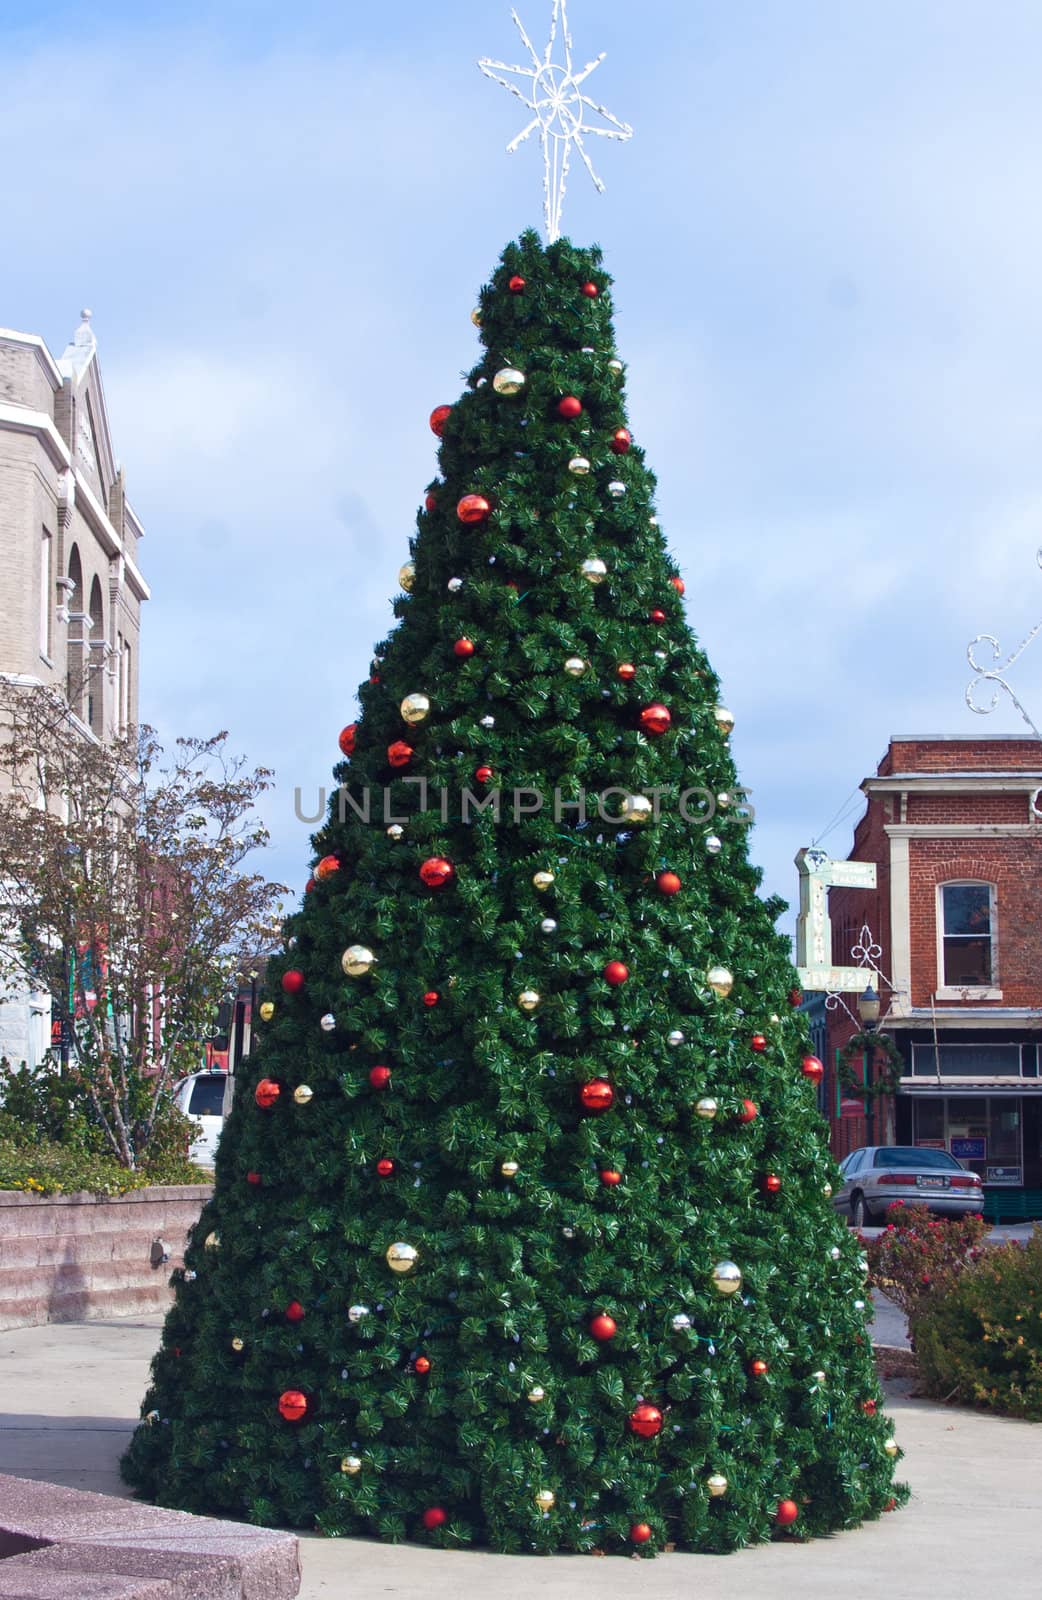 Christmas Tree in the downtown of historic Chester South Carolina